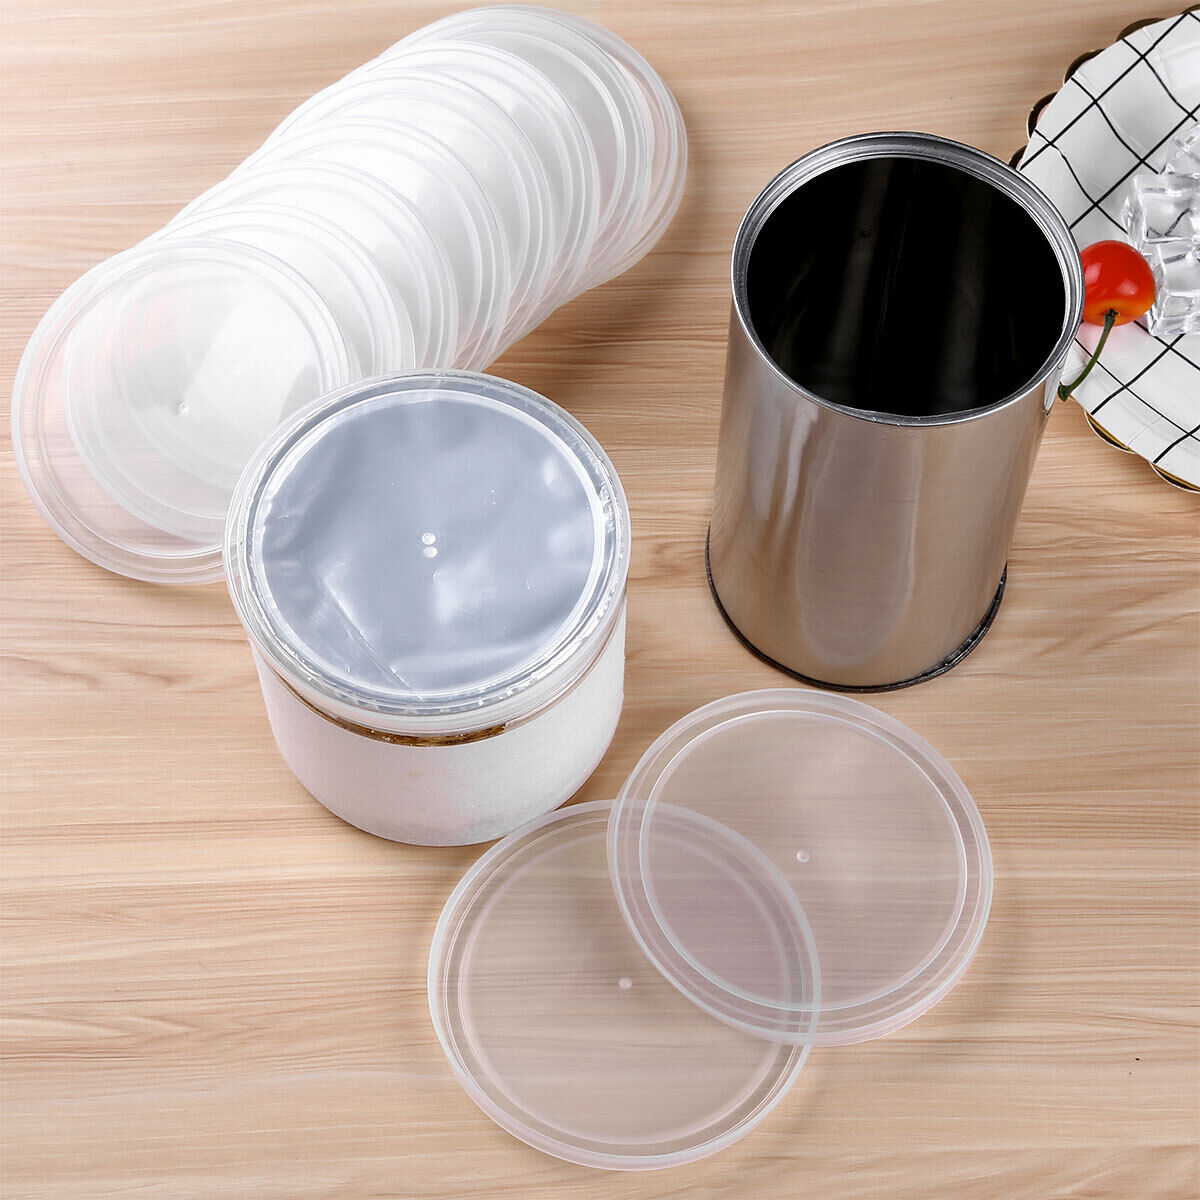 US 12Pc Food Can Lids Cover 4-Inch Plastic Reusable Storage Cap for Canned Goods